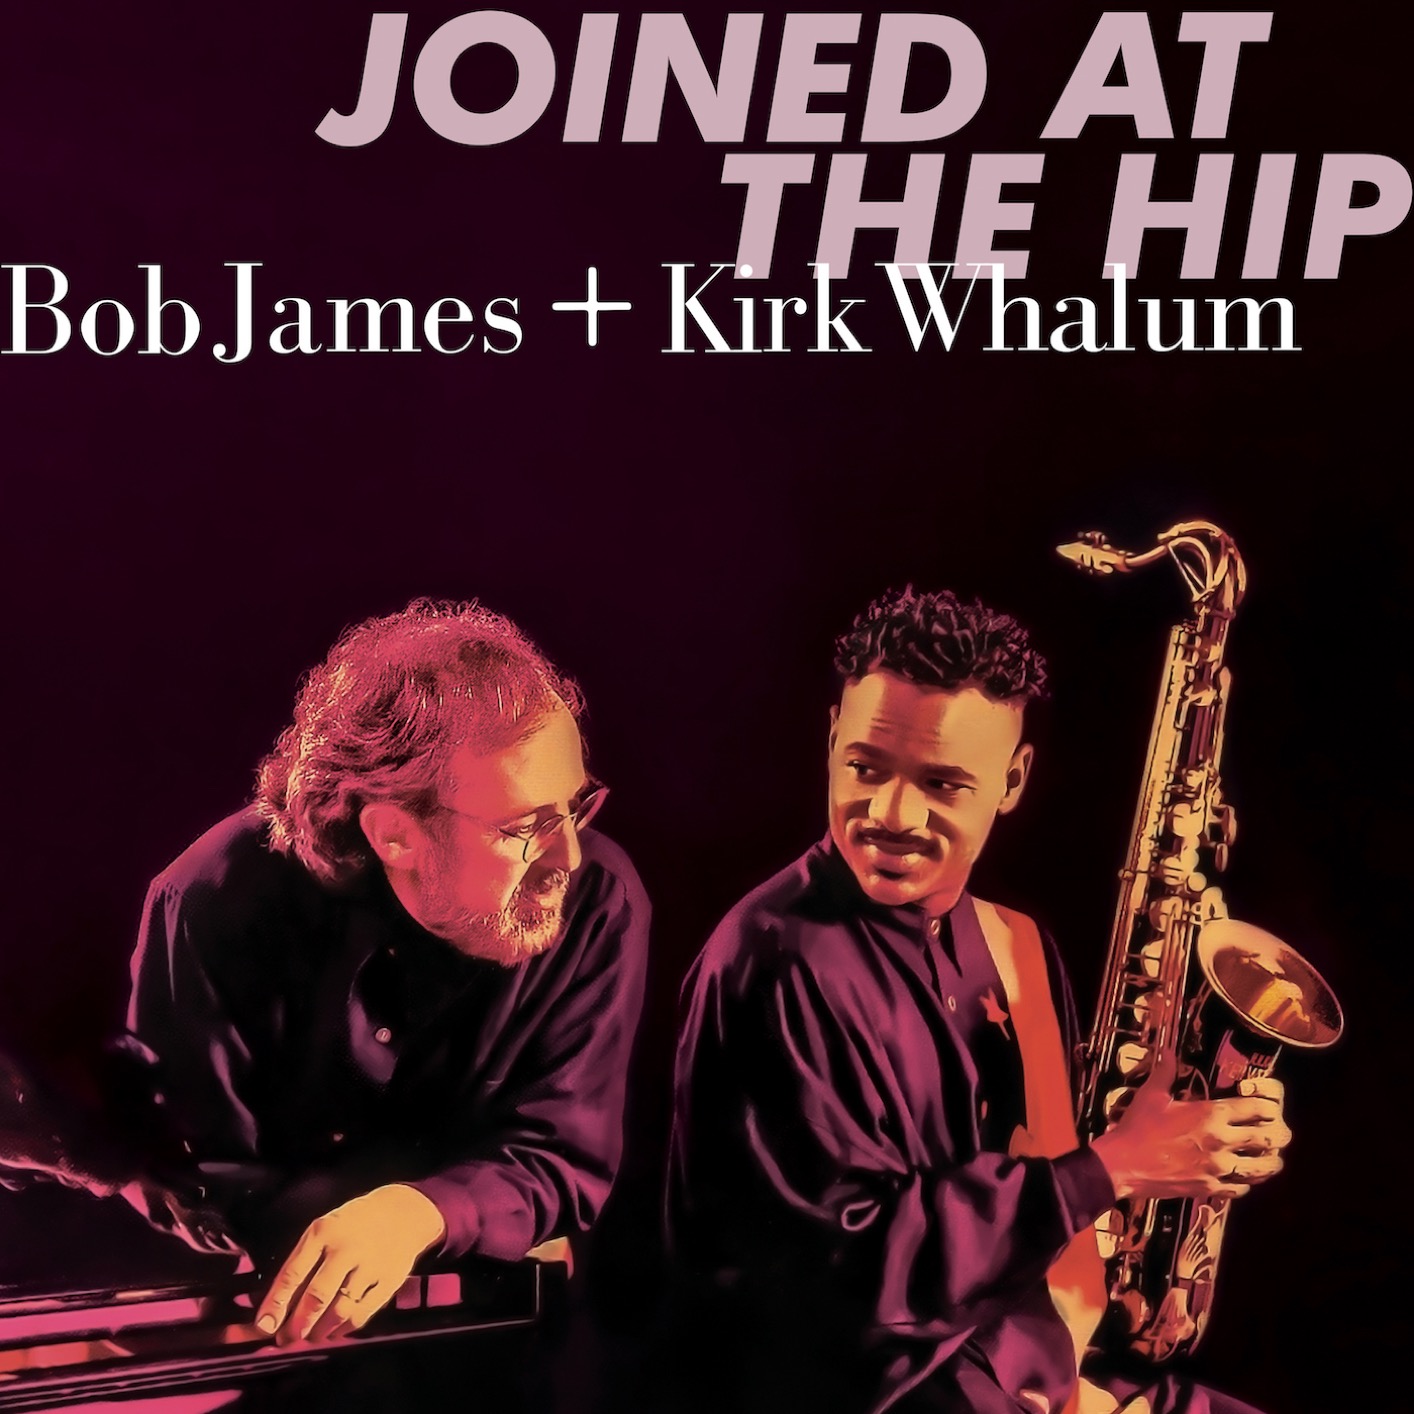 Bob James & Kirk Whalum - Joined At The Hip (Remastered) (2006/2019) [FLAC 24bit/44,1kHz]